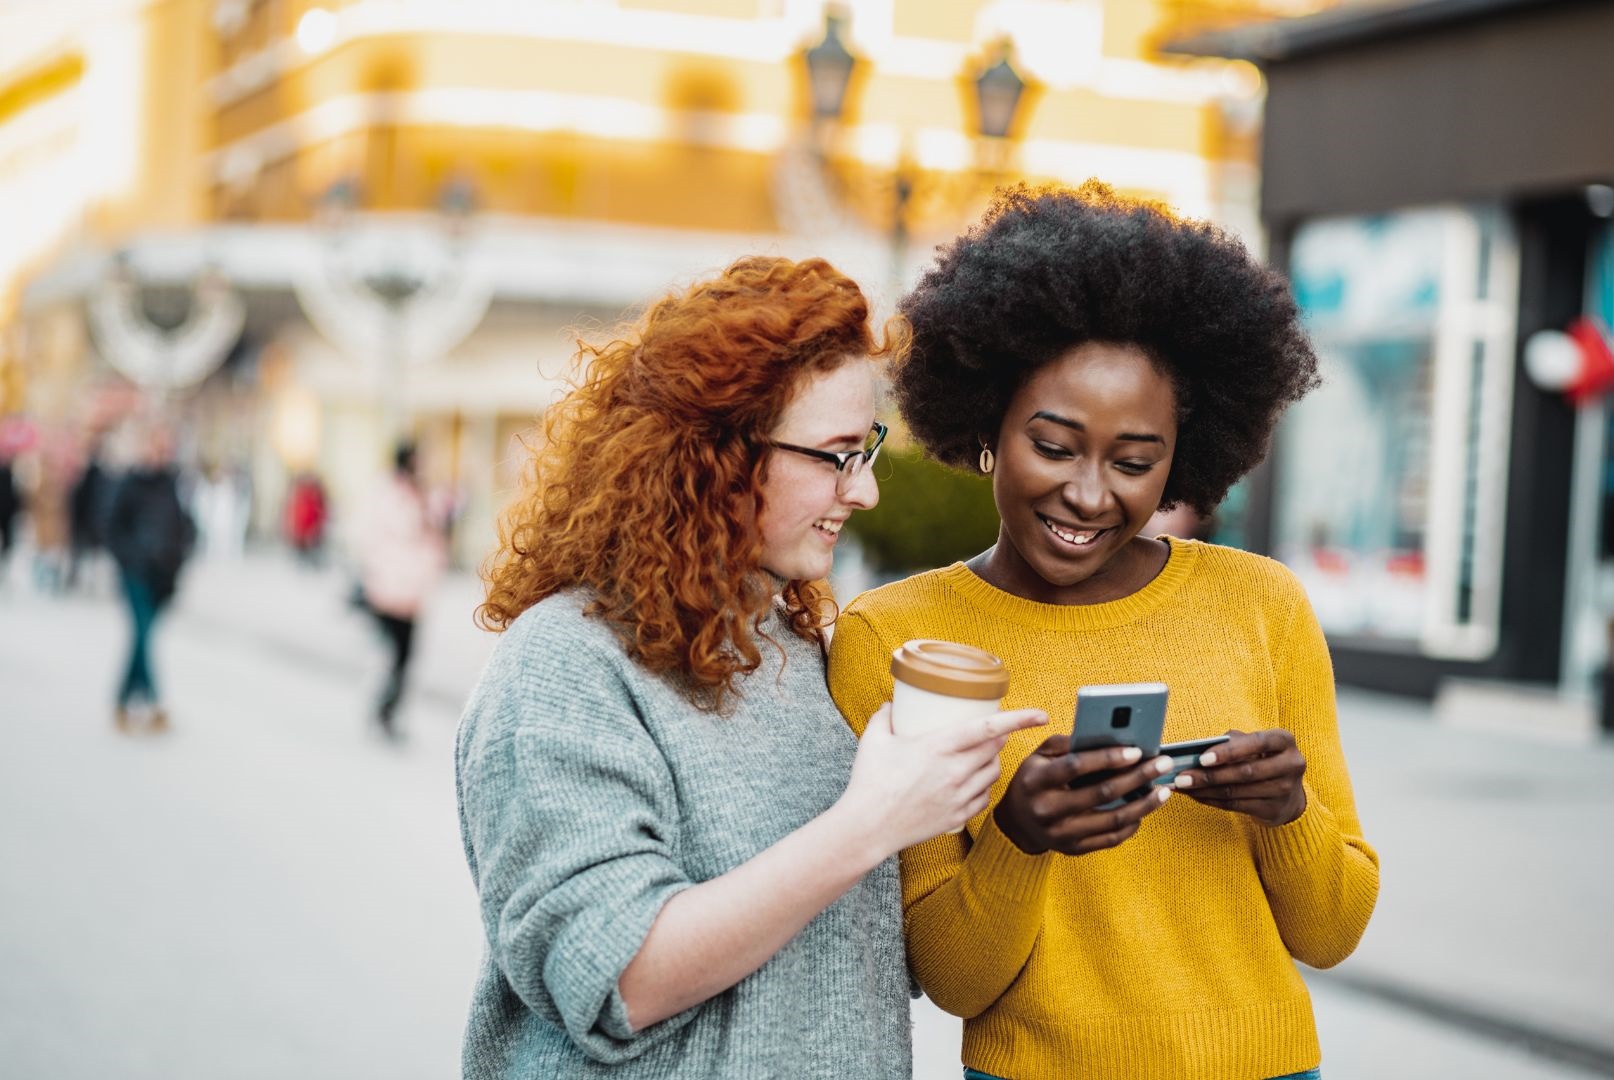 Women drinking coffee, looking at an app - Targeted and Personalized Marketing with Loyalty Programs